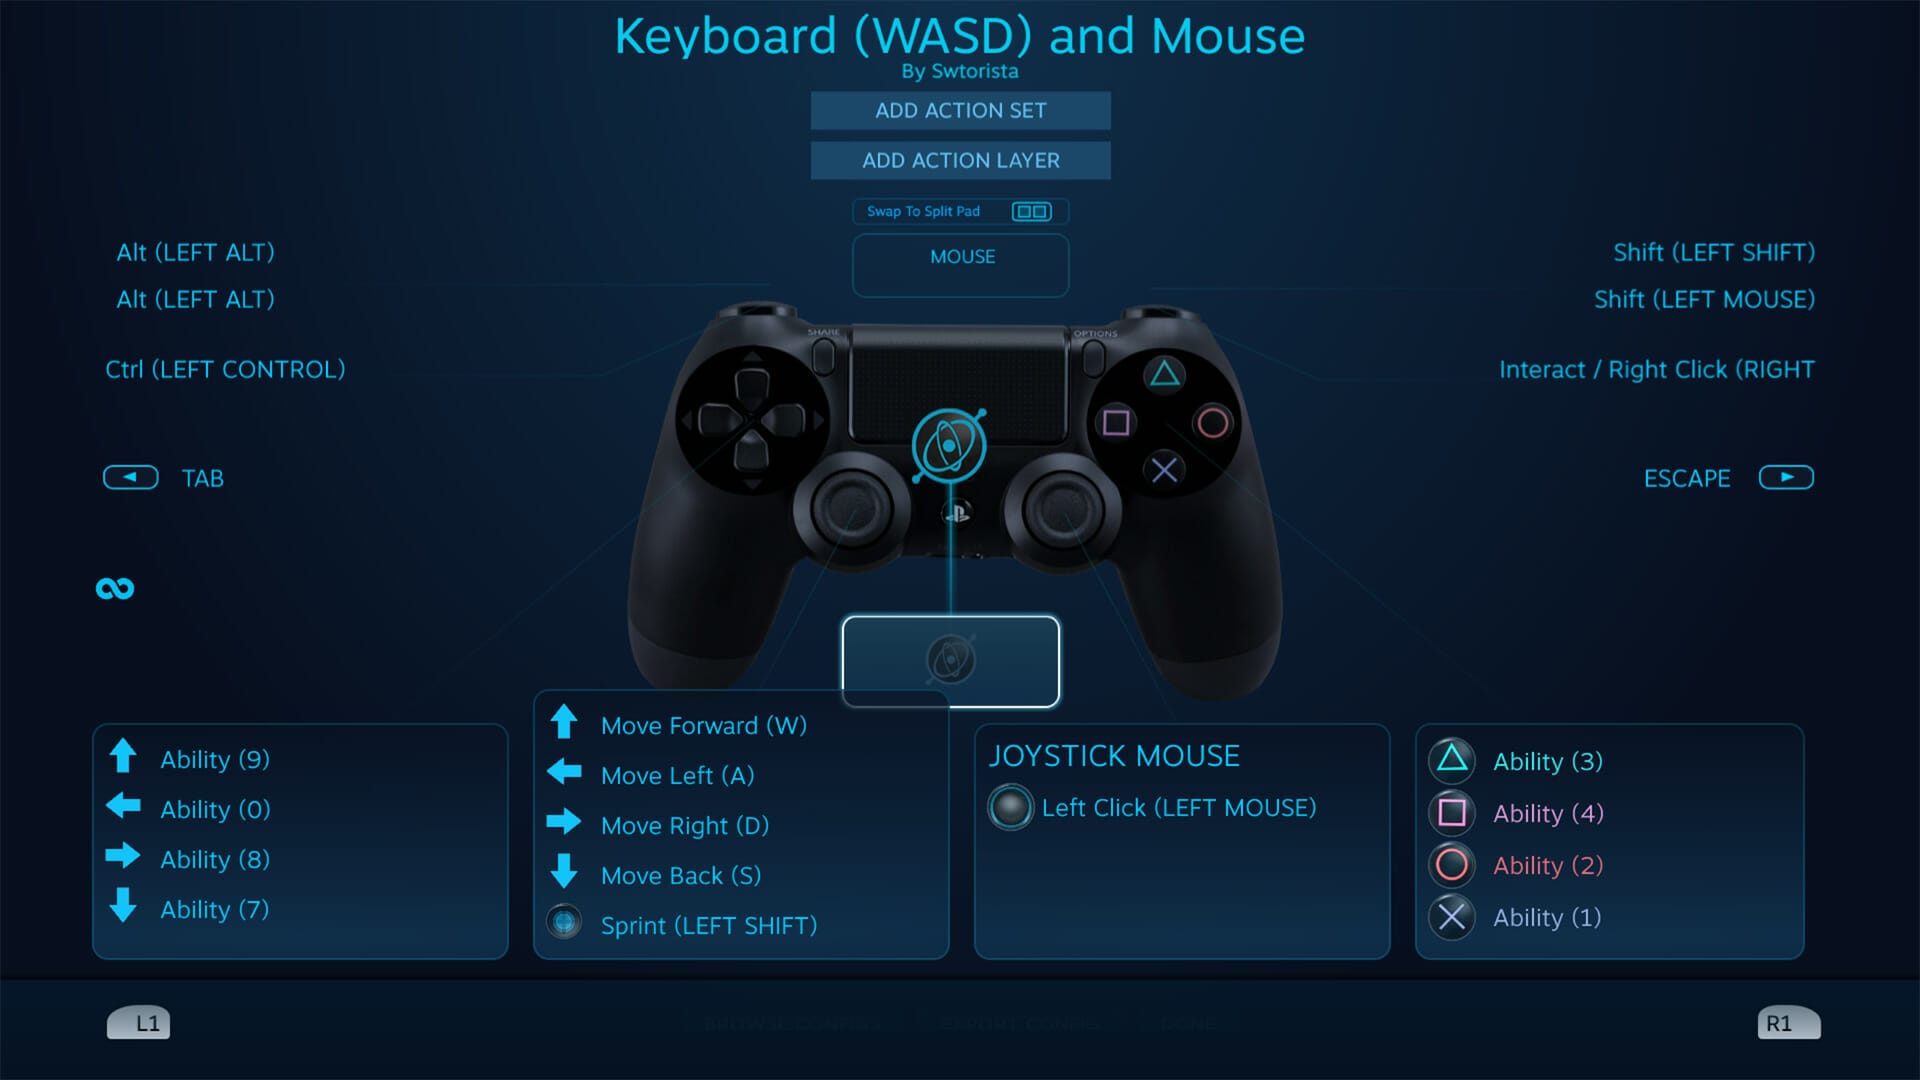 How To Play Swtor With A Ps4 Controller On Steam